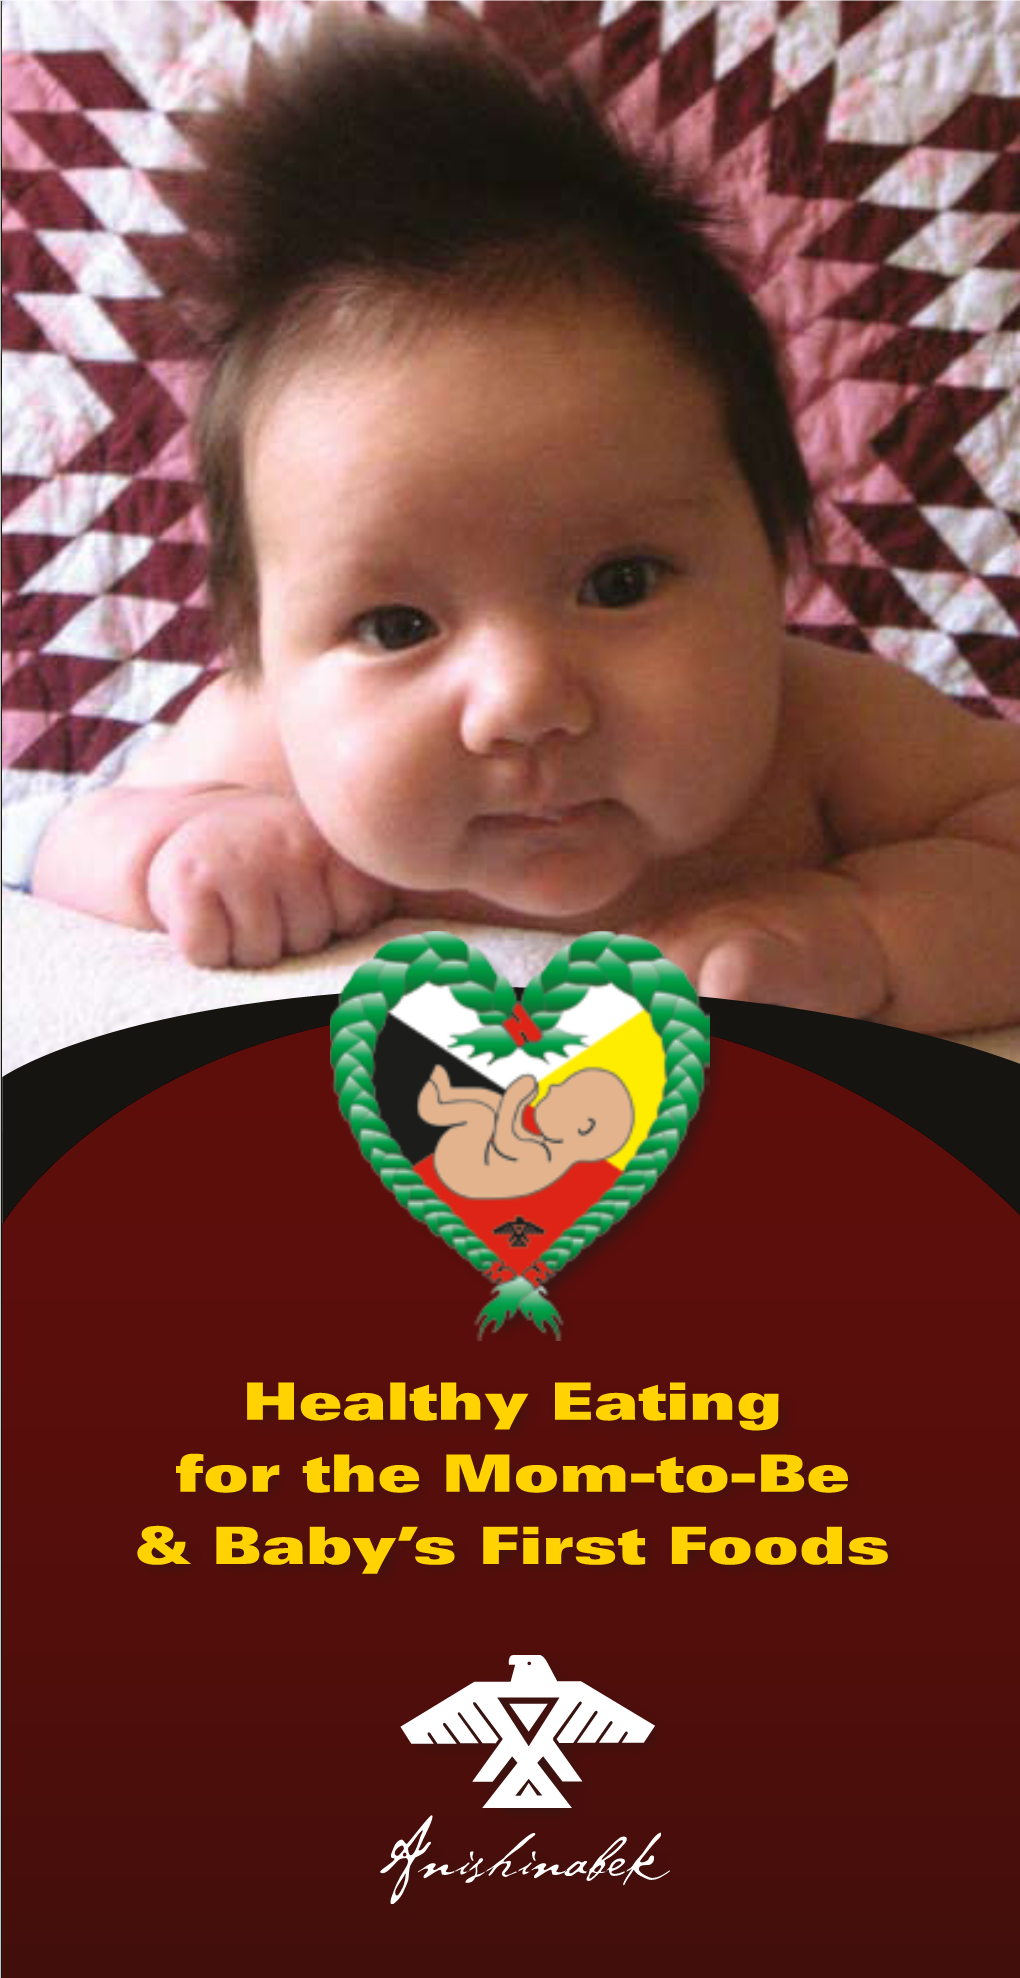 Anishinabek Healthy Eating for the Mom-To-Be and Baby's First Foods